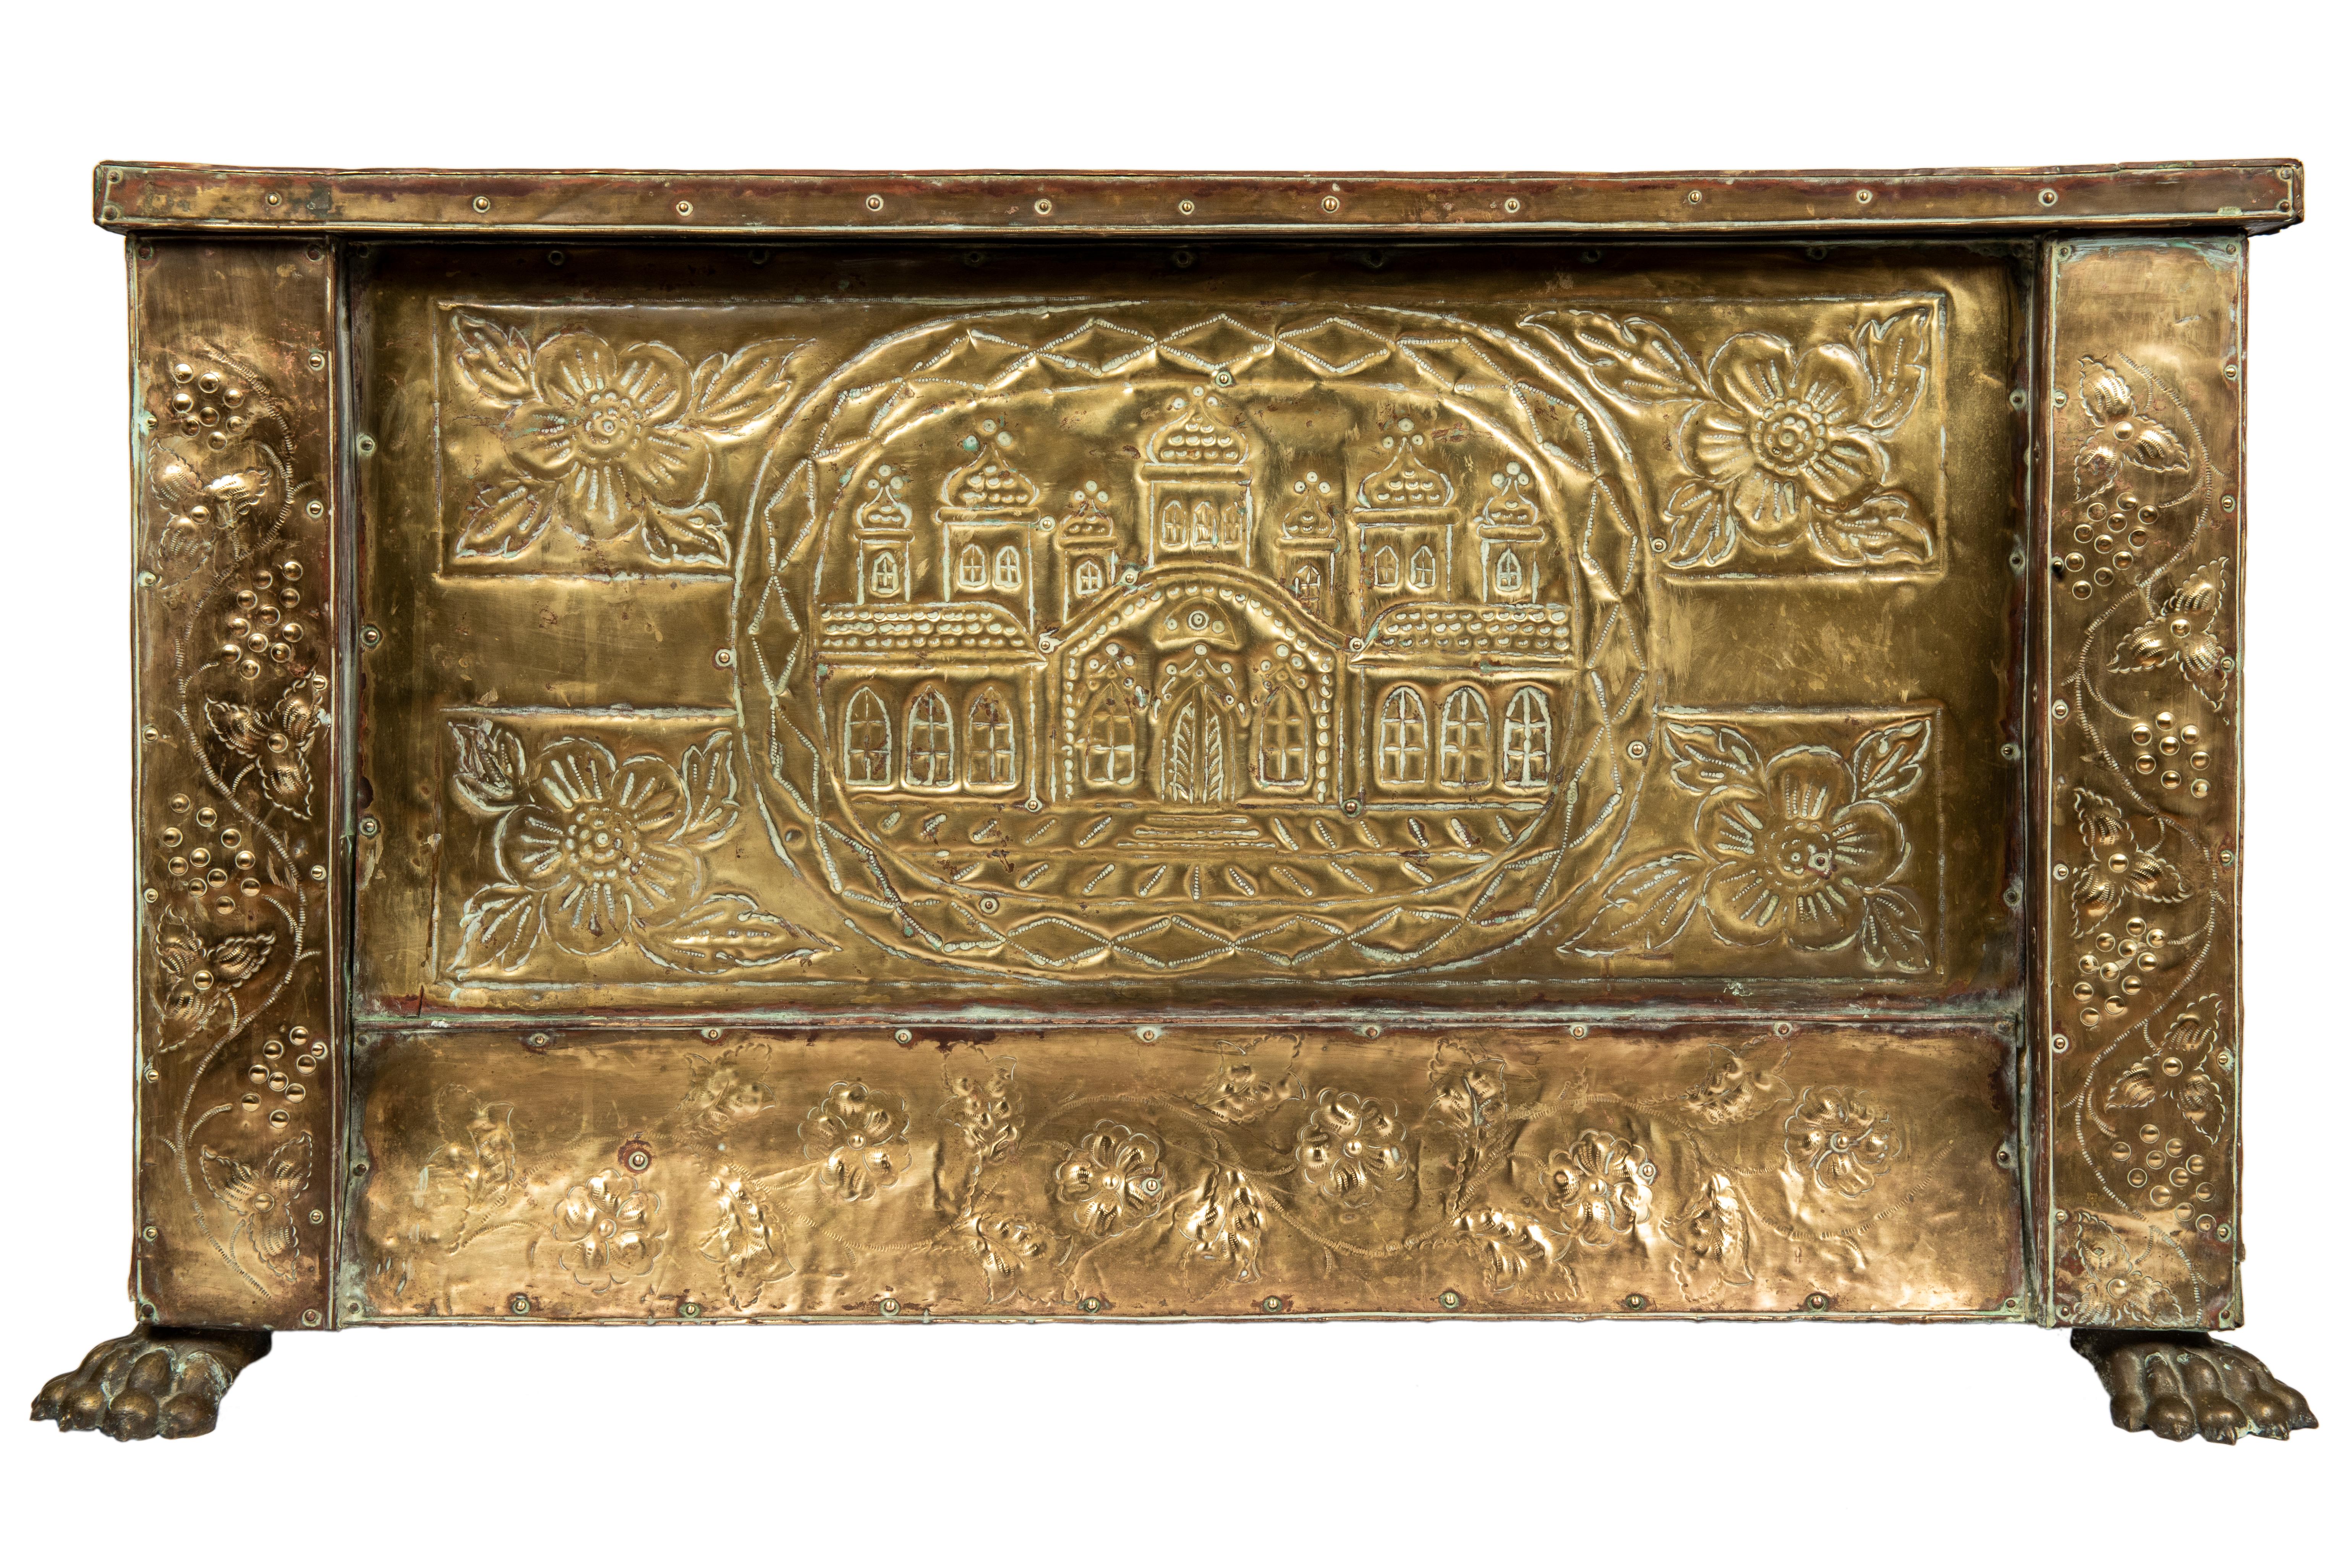 A rustic pine trunk adorned brass embossed panels, the front, sides and lid depicting flowers, vines, and berries, the hinged lid featuring a large Russian imperial eagle flanked by floral panels, the front, a church or monastery with onion domes,